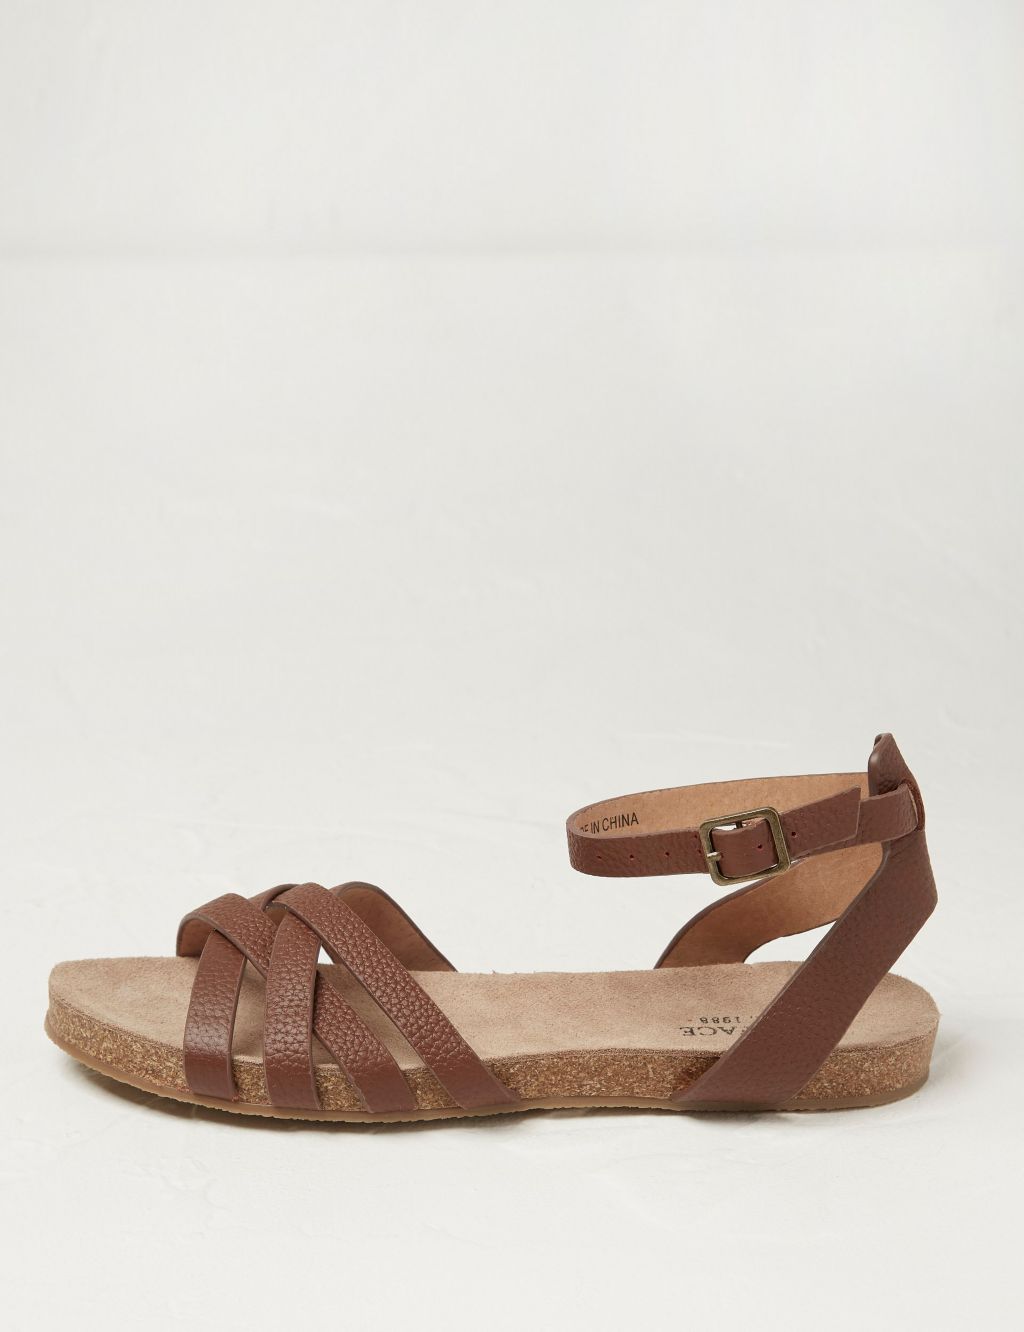 Leather Ankle Strap Flat Sandals image 2